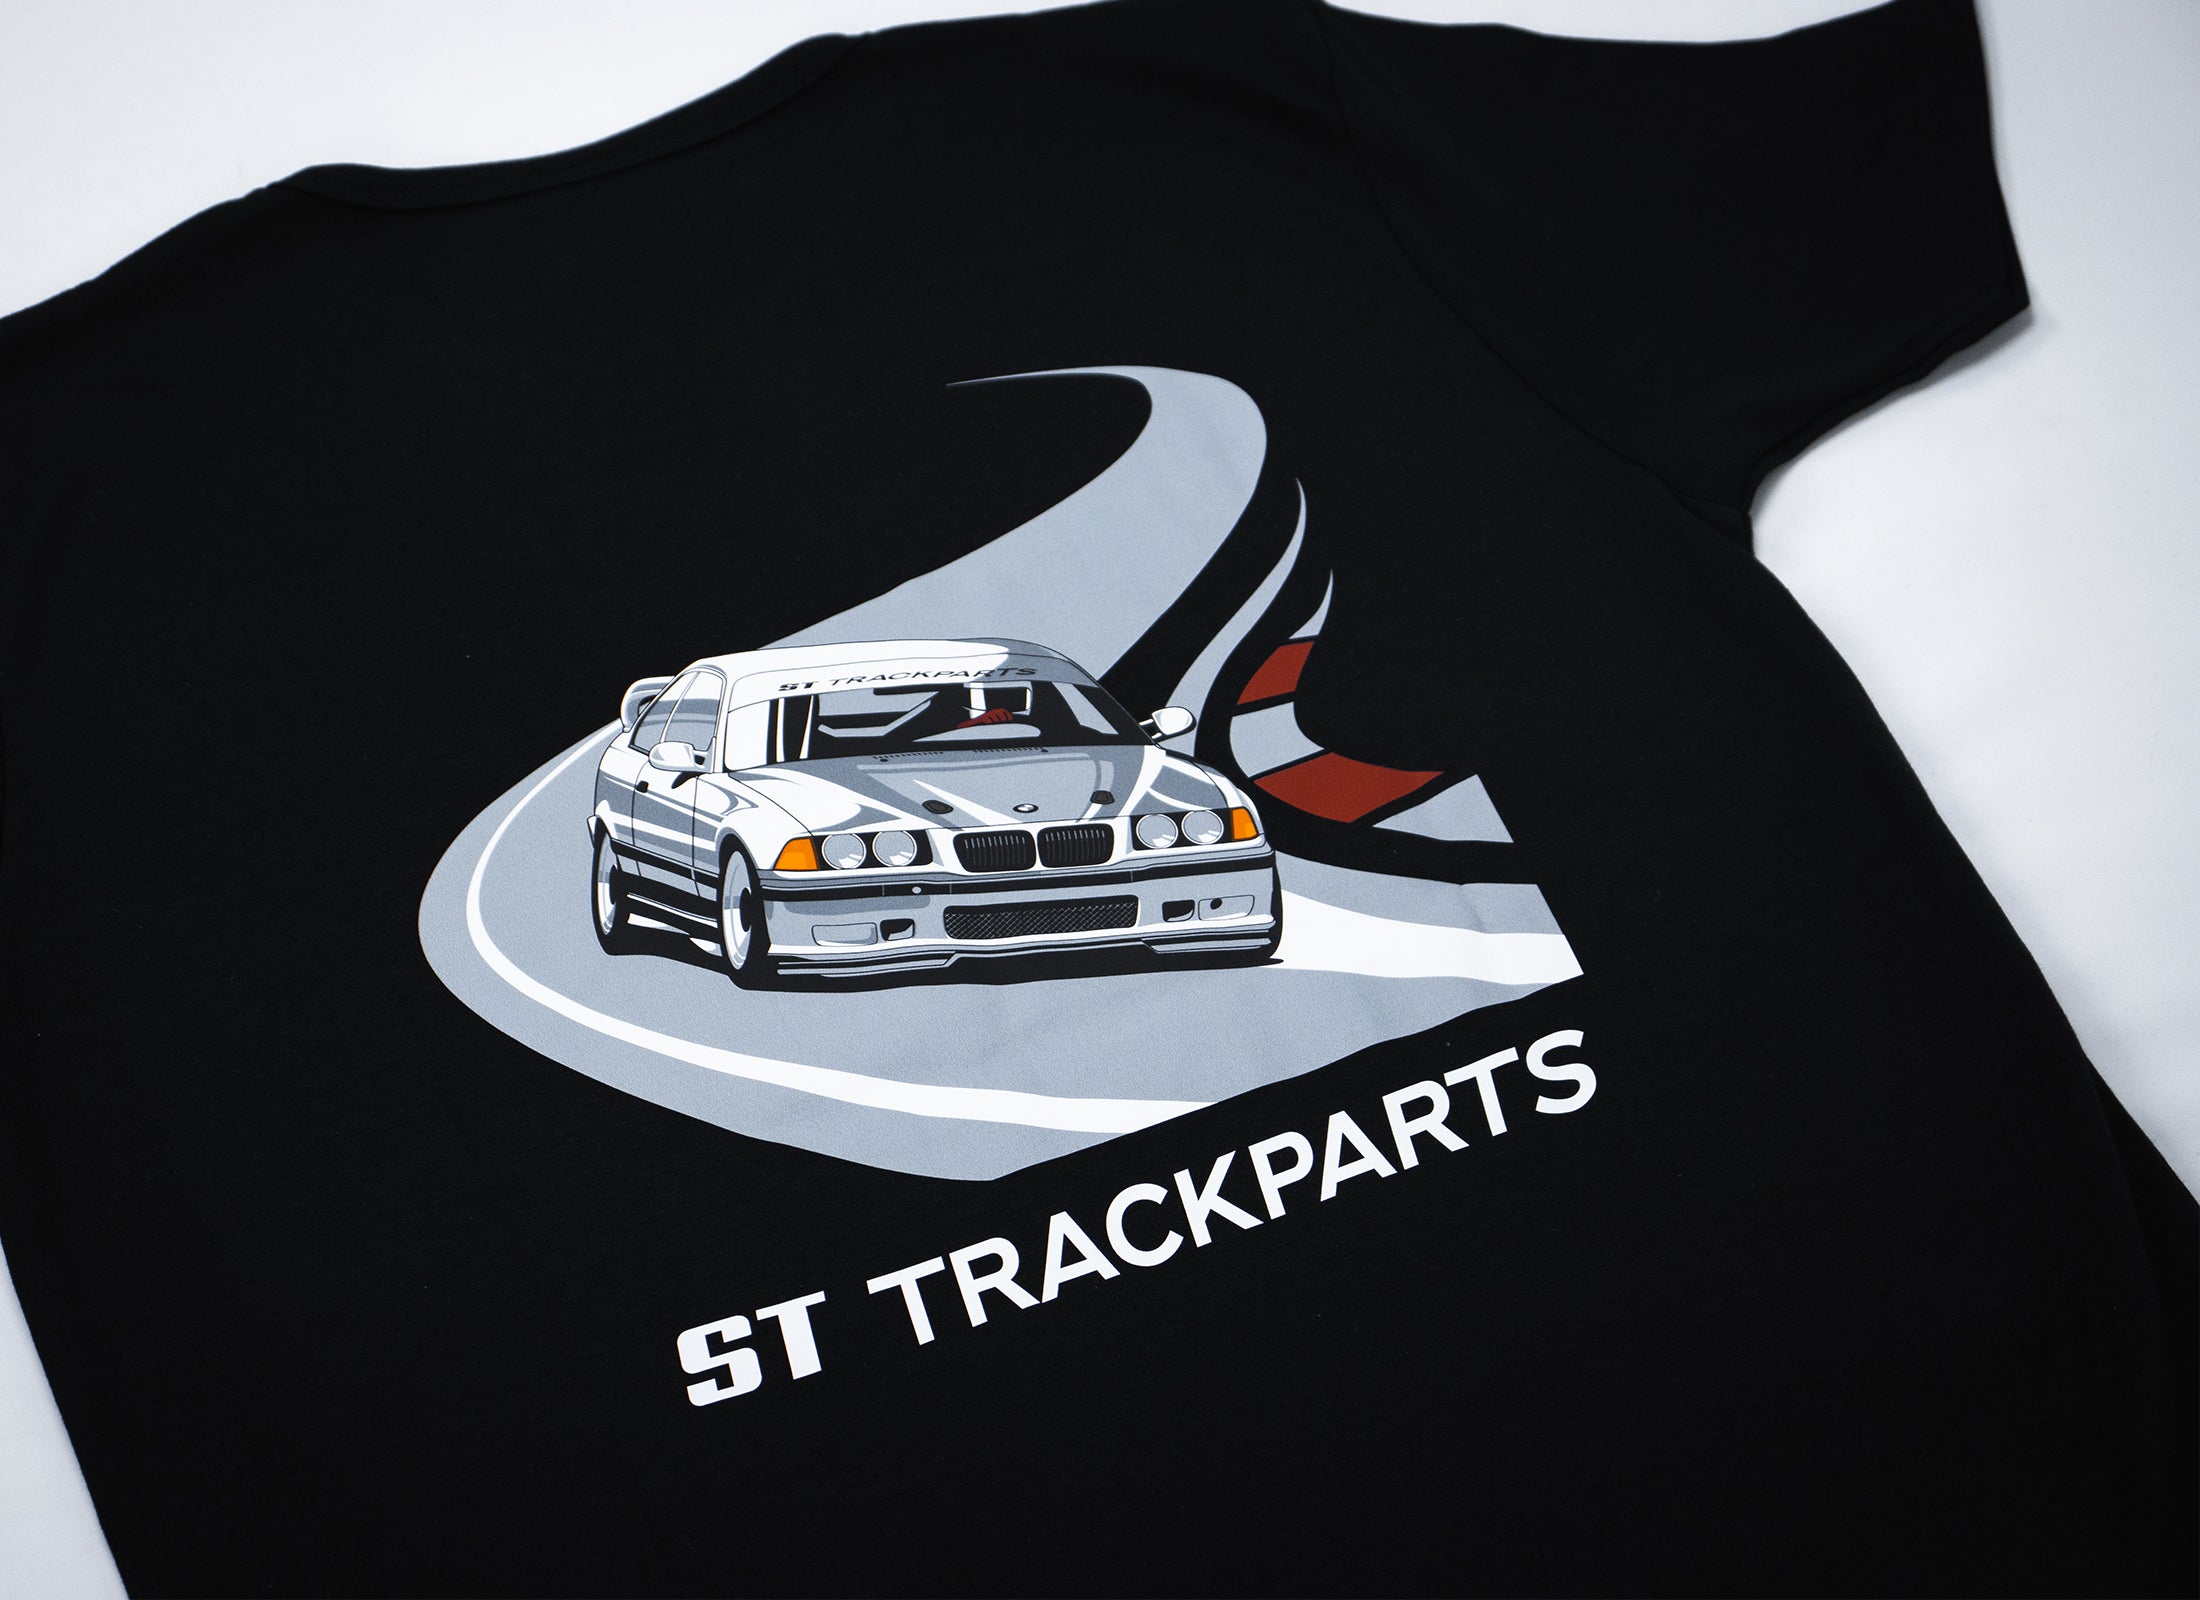 ST-Trackparts E36 T-shirt – ST Trackparts